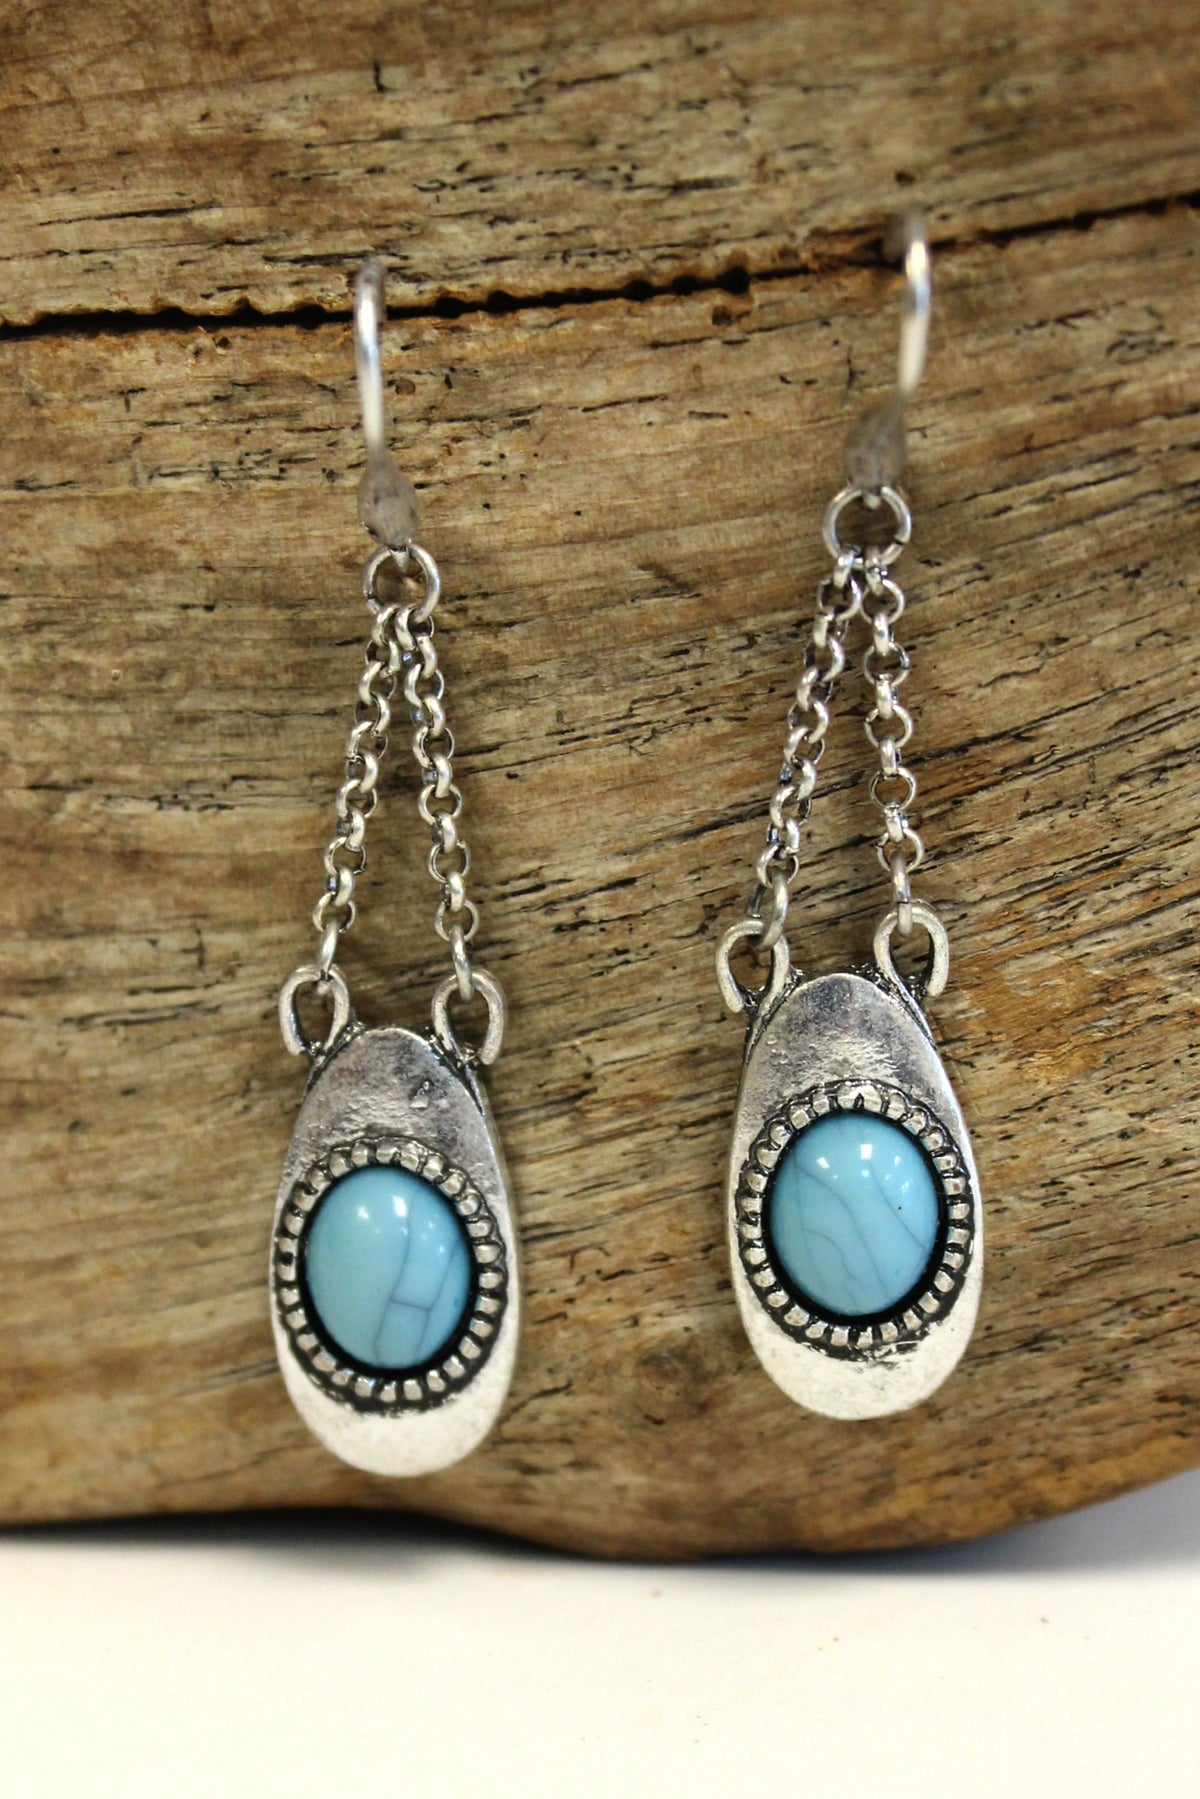 Chain and Frame Earrings, Turquoise